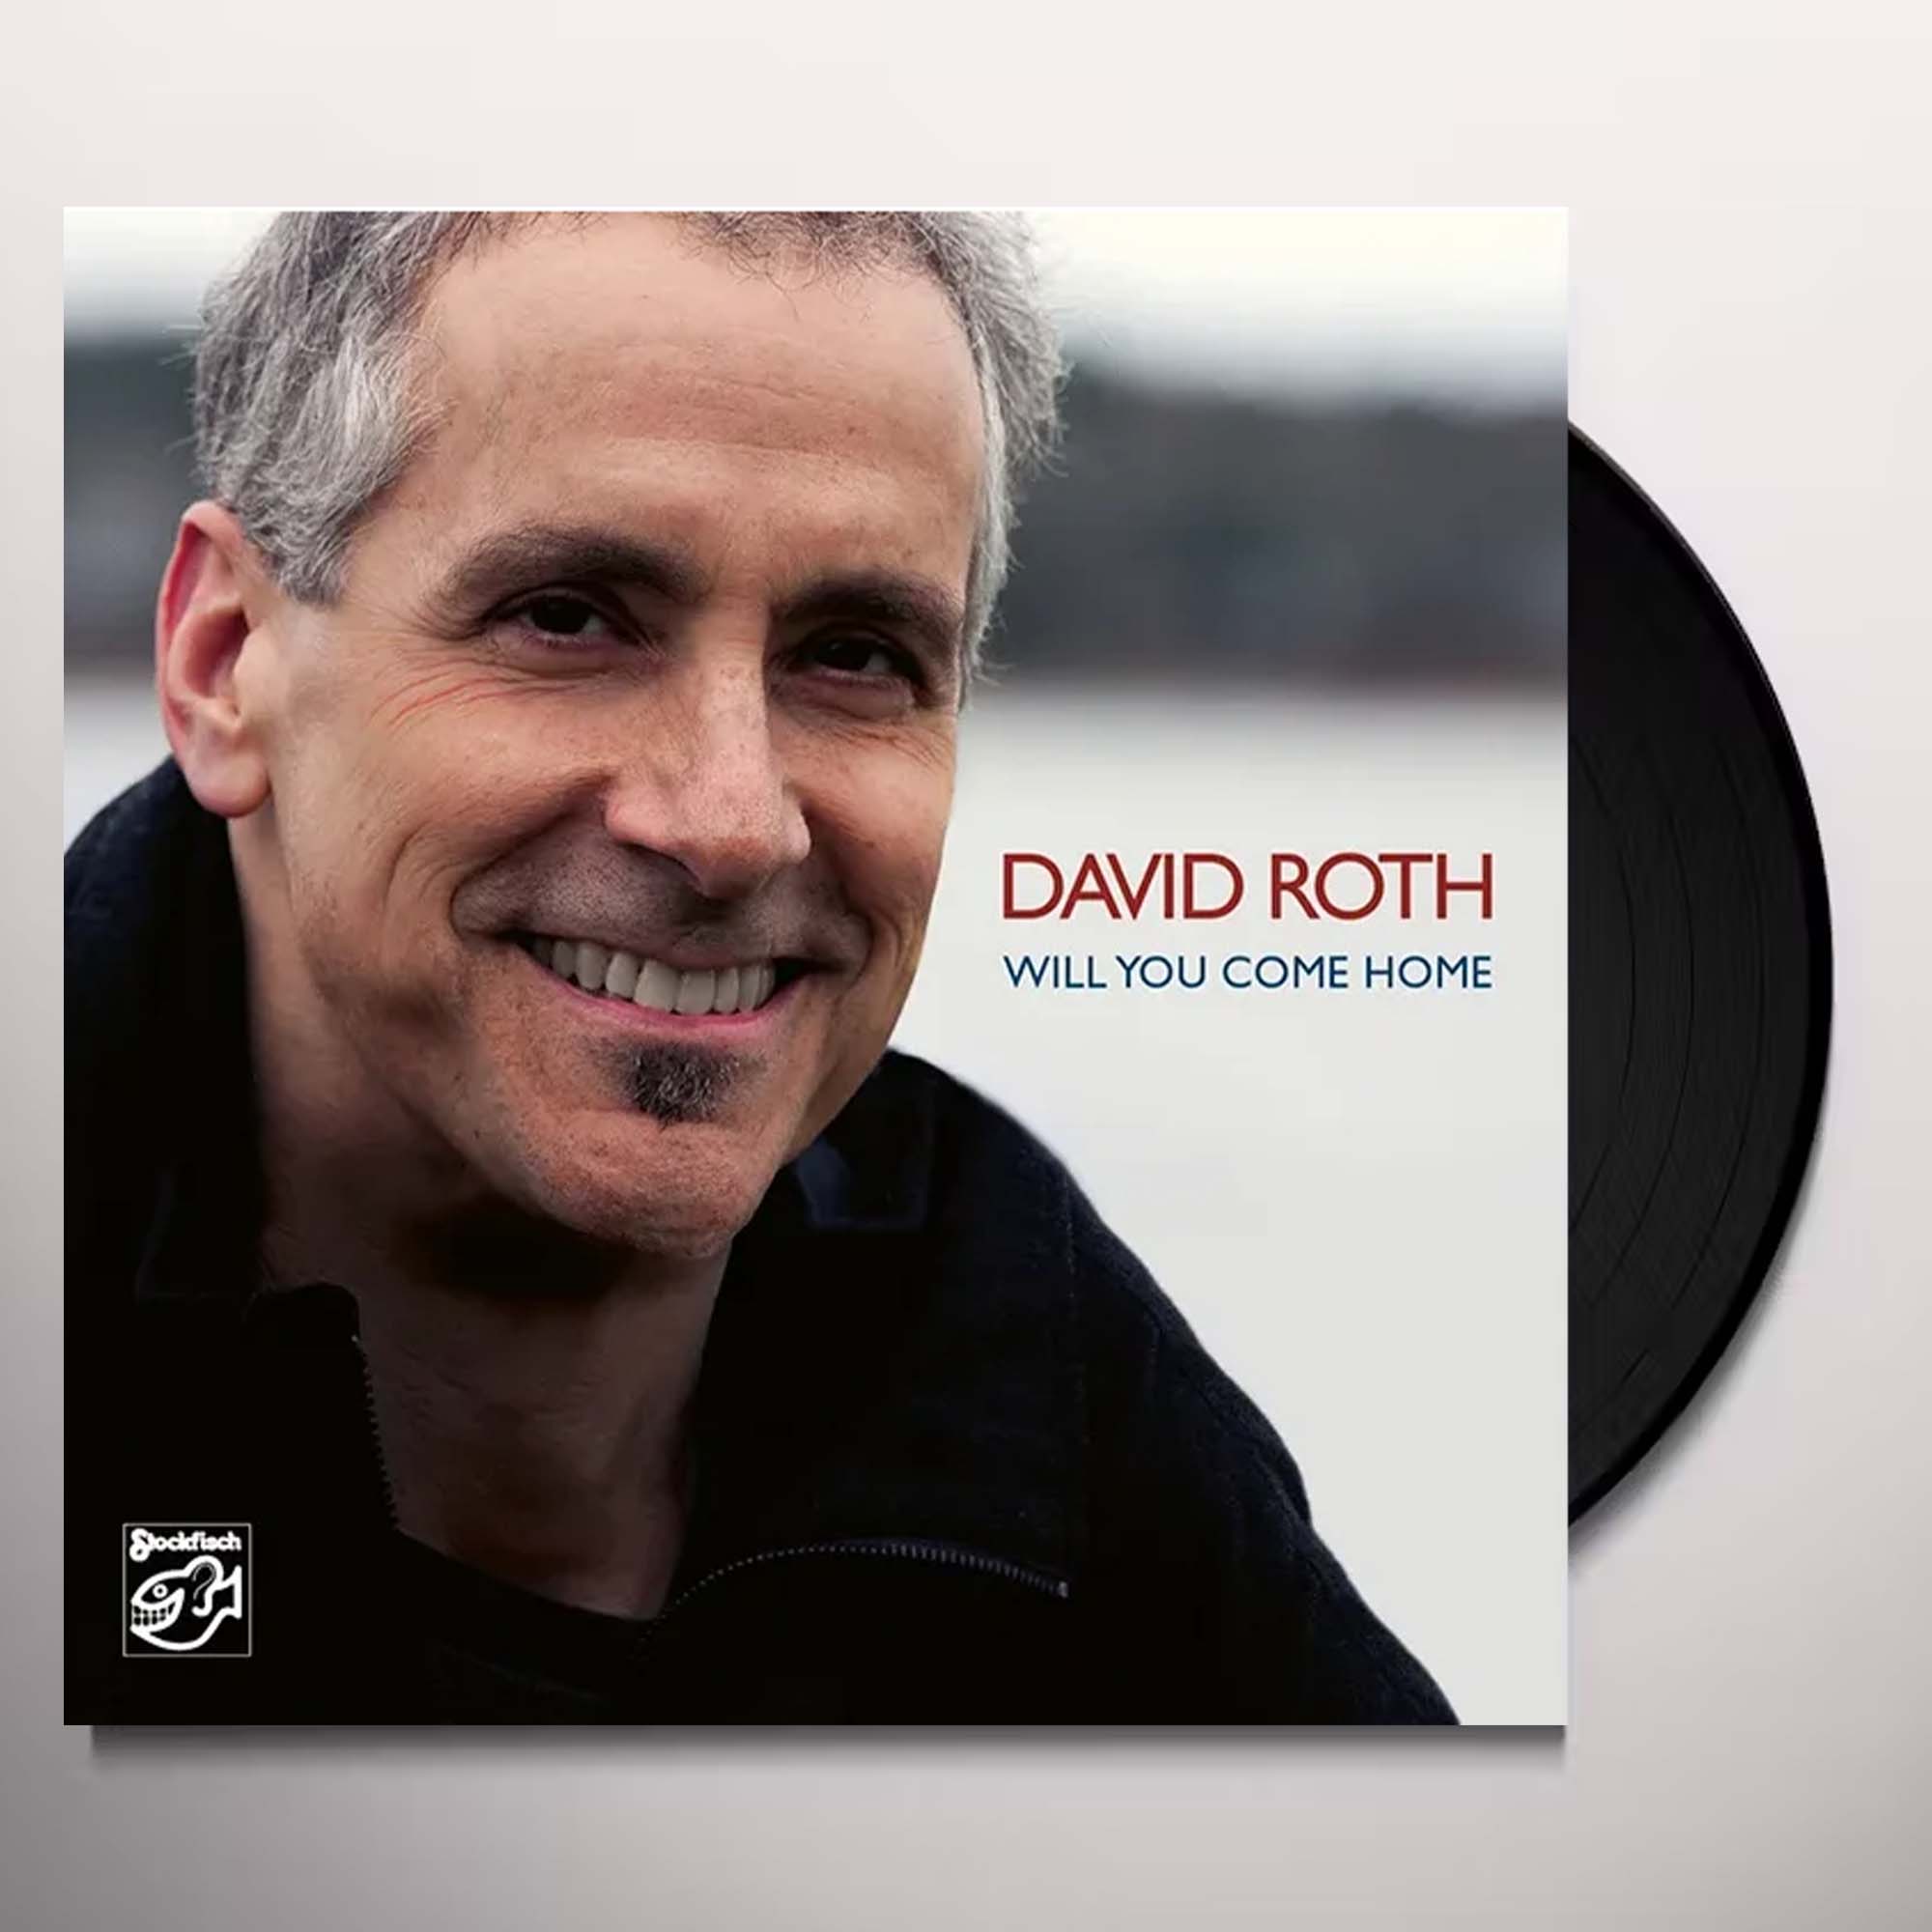 Пластинка Stockfisch Records David Roth - Will You Come Home 2LP - фото 2